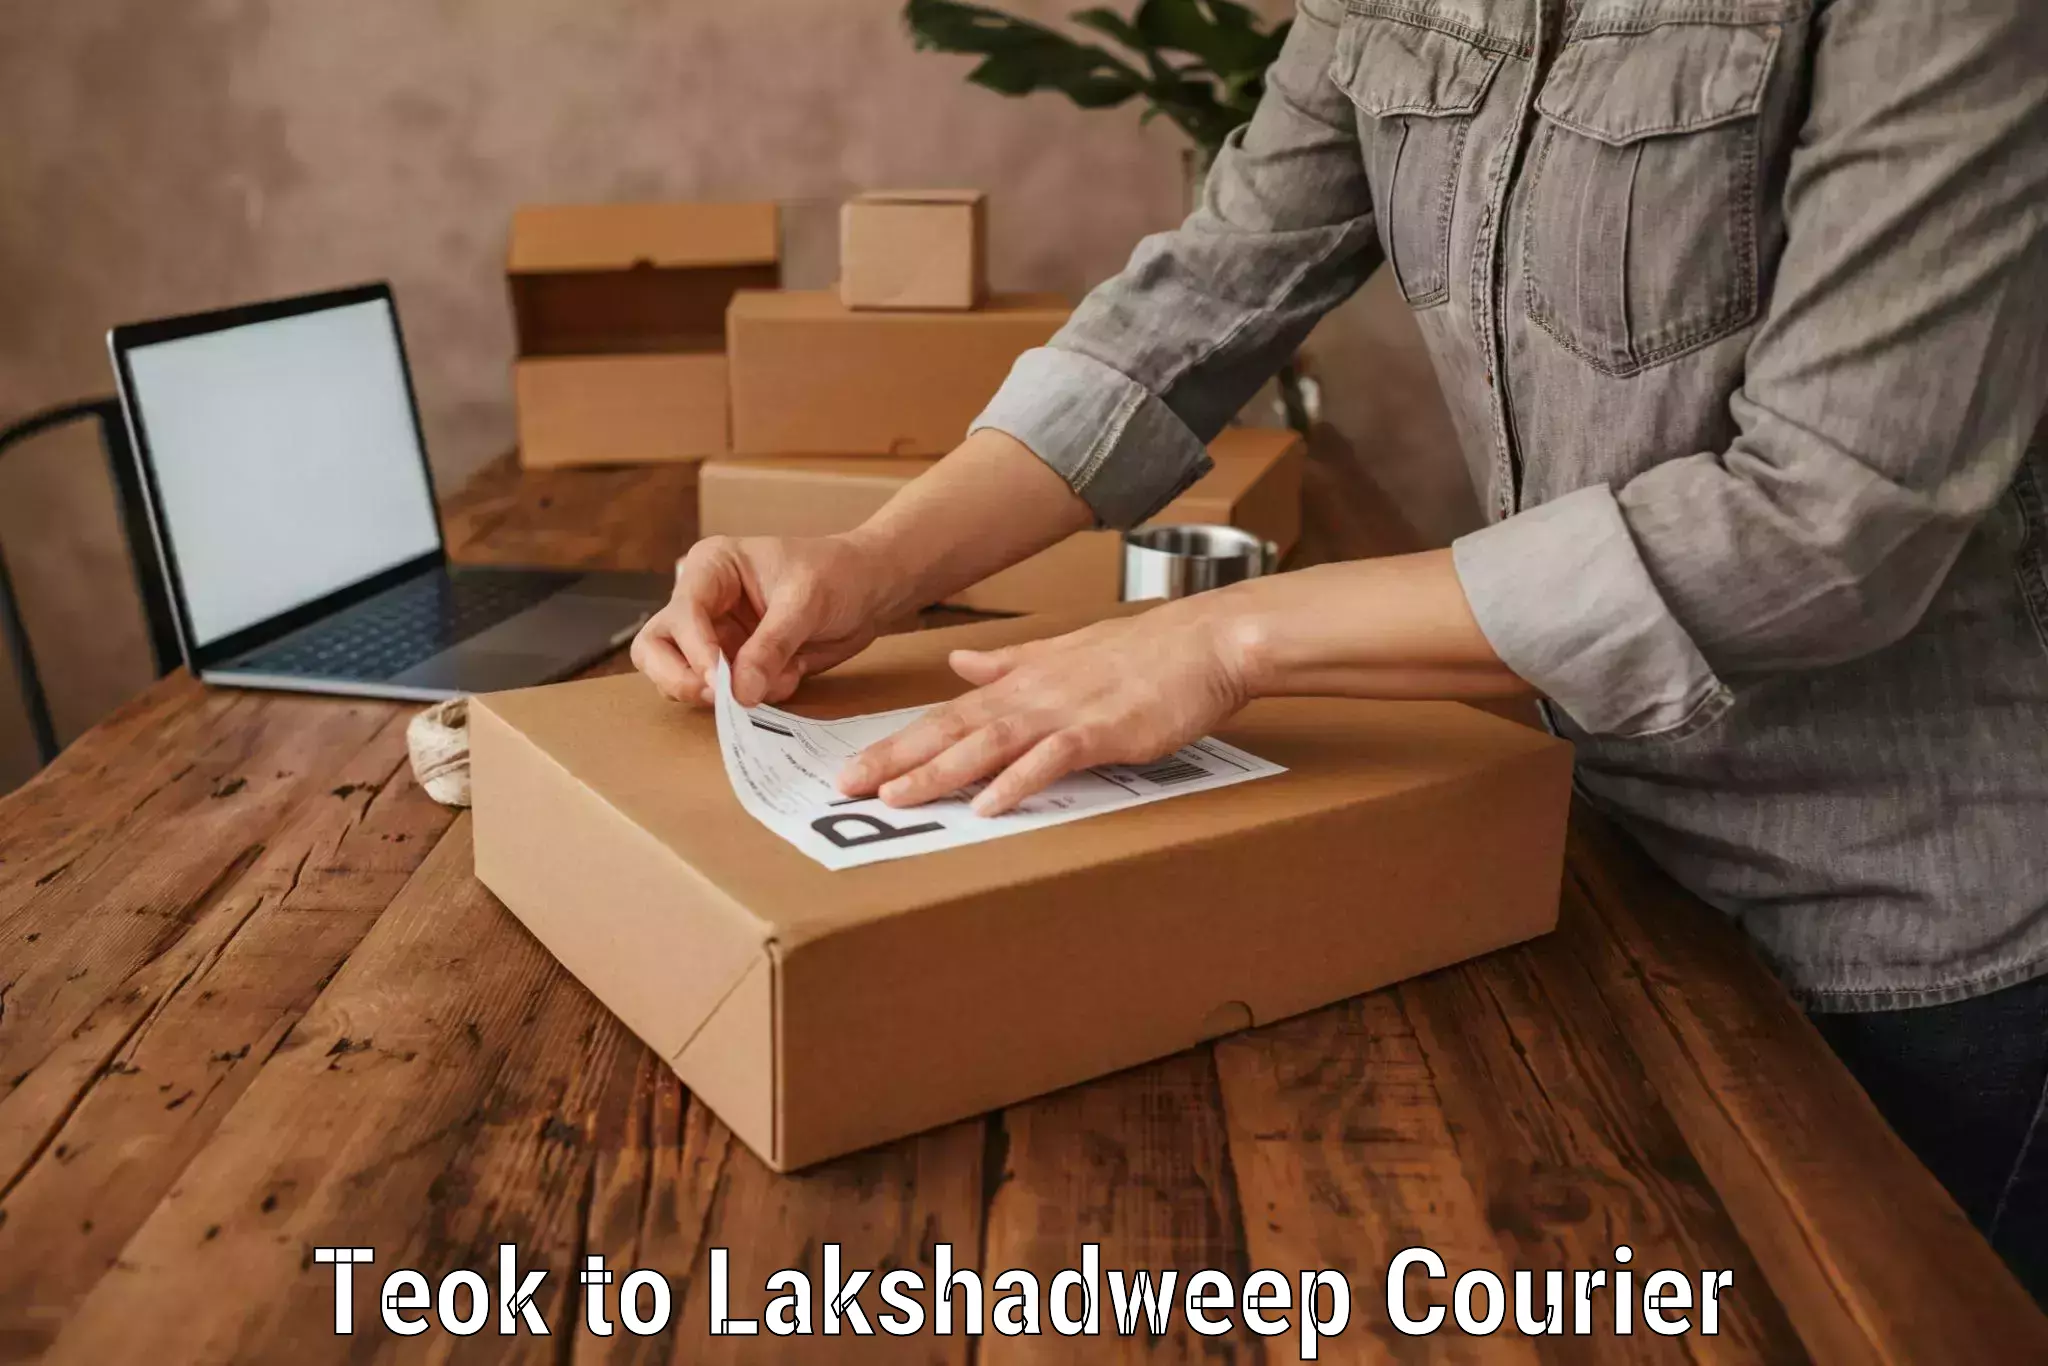 Express luggage delivery Teok to Lakshadweep